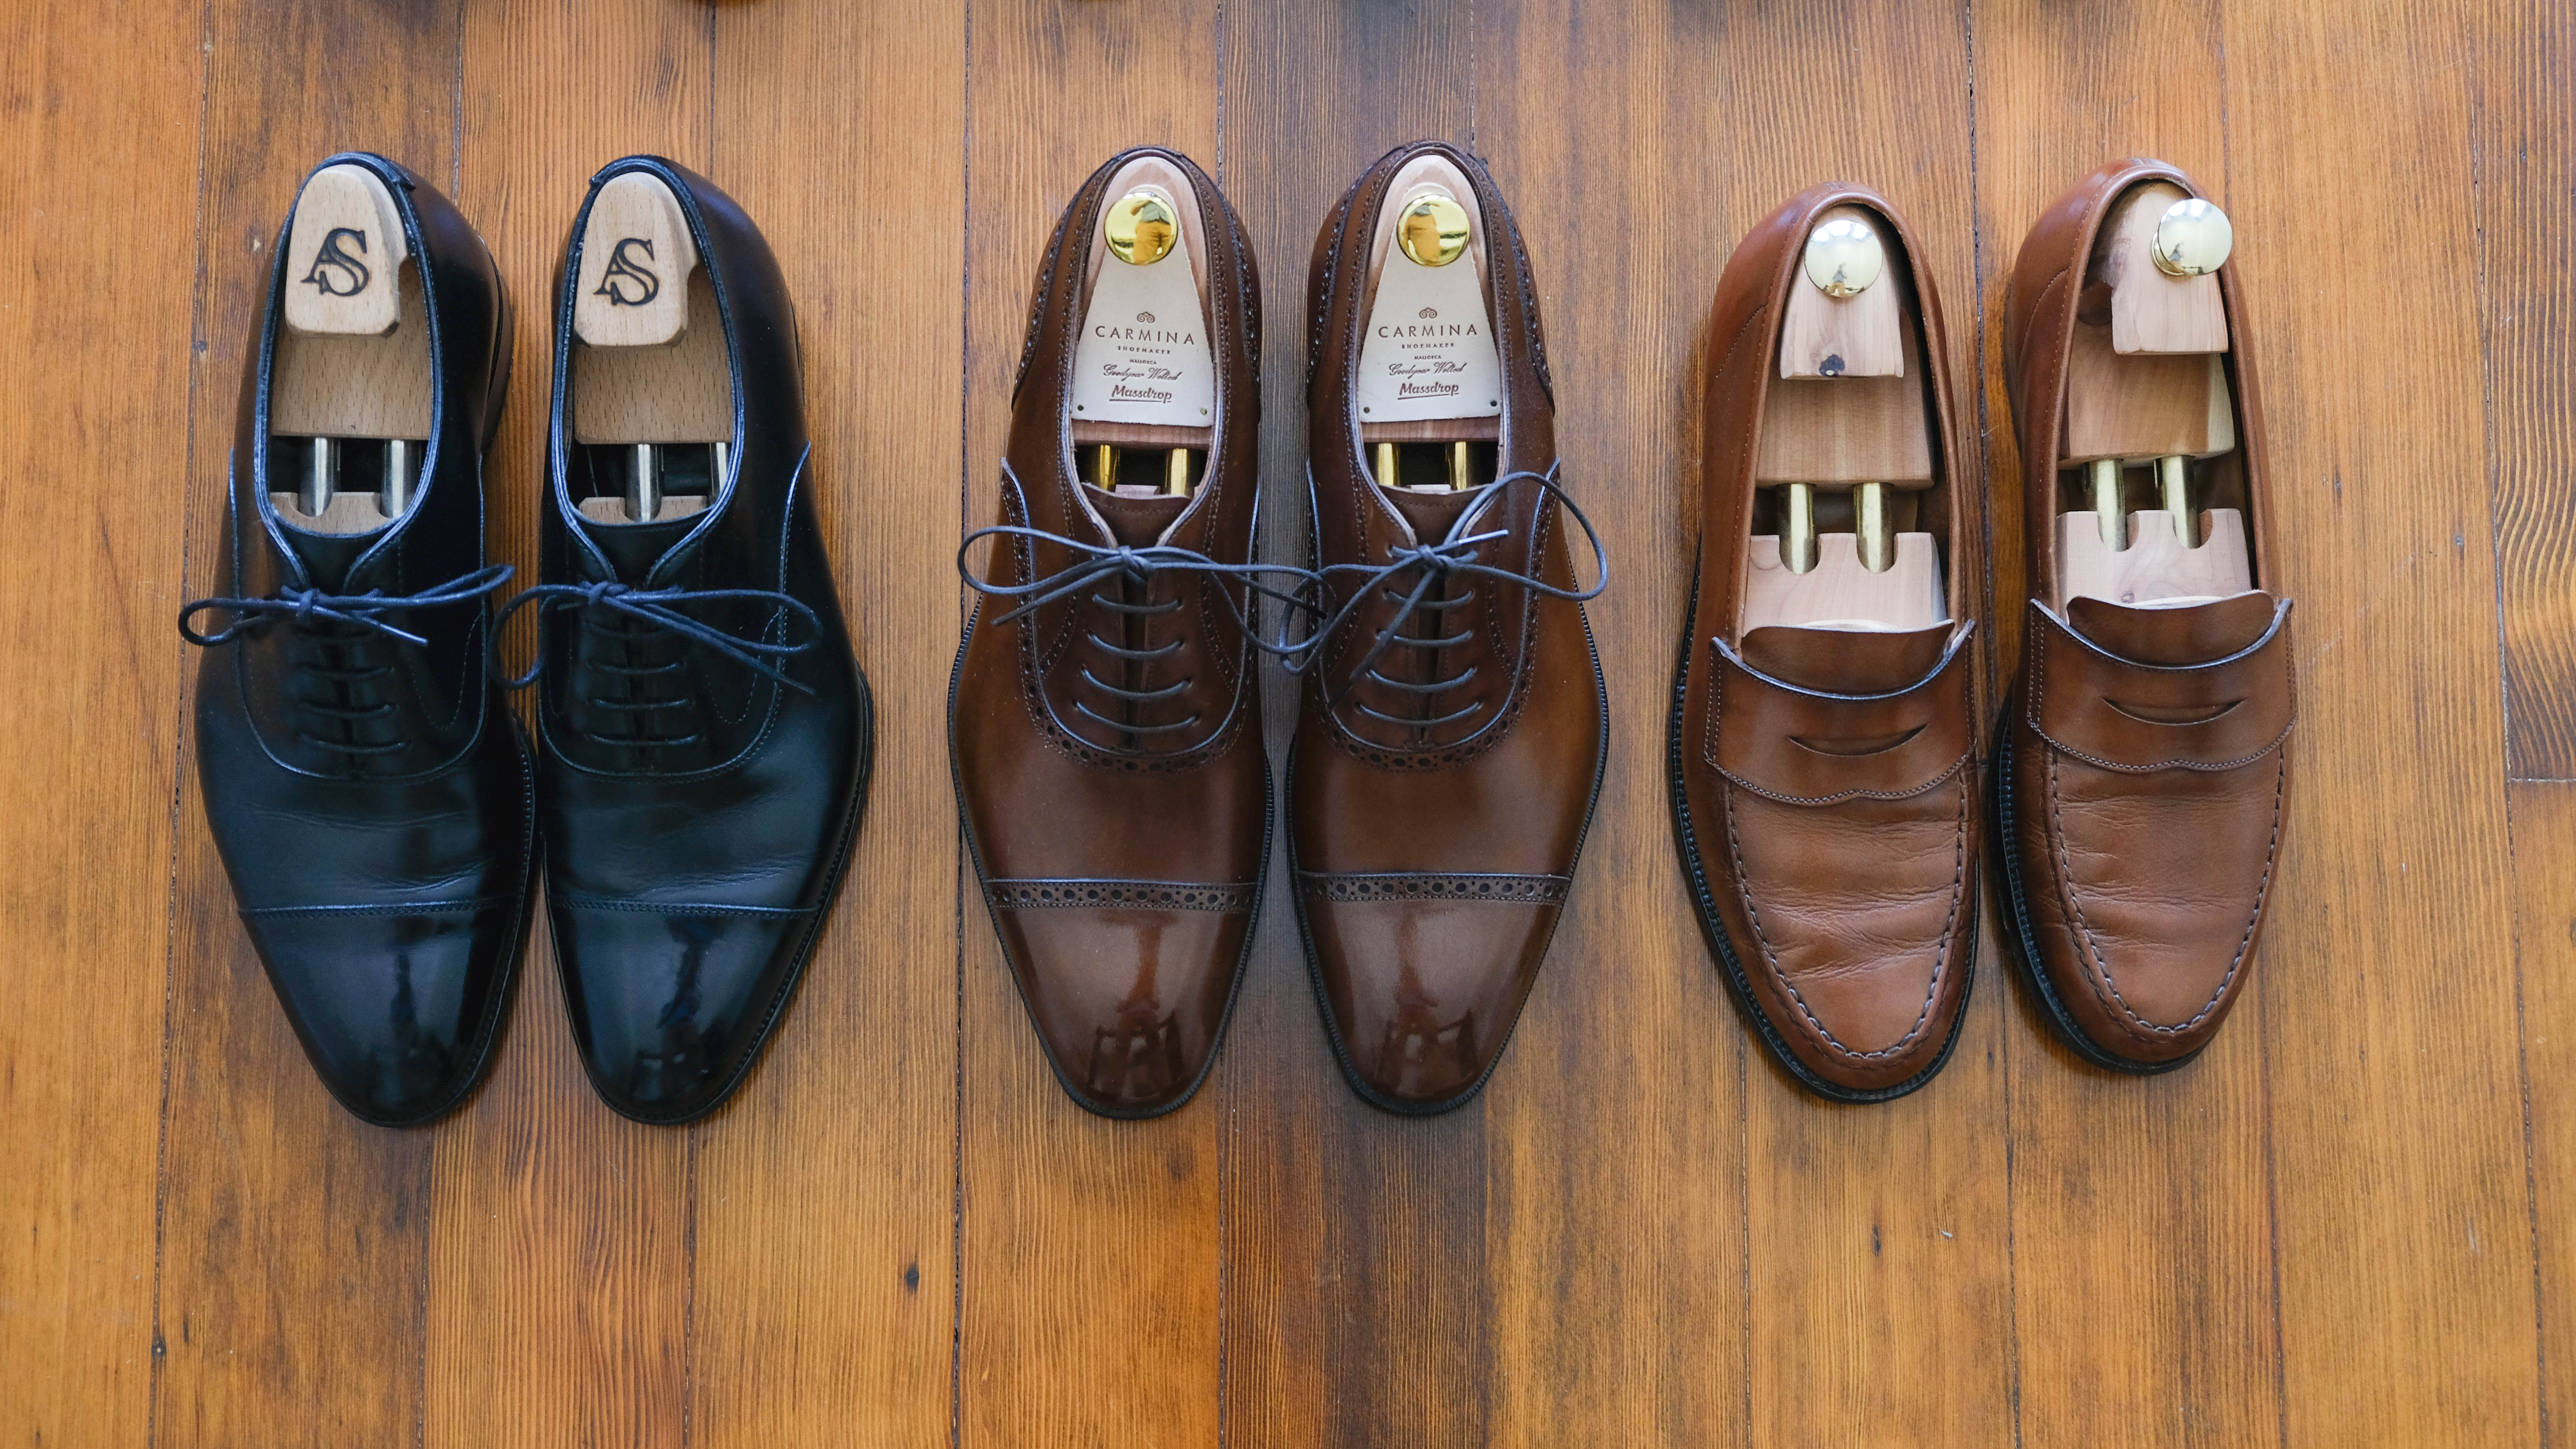 Allen Edmonds Adds Free Two-Day Shipping to Its Latest Sale - InsideHook